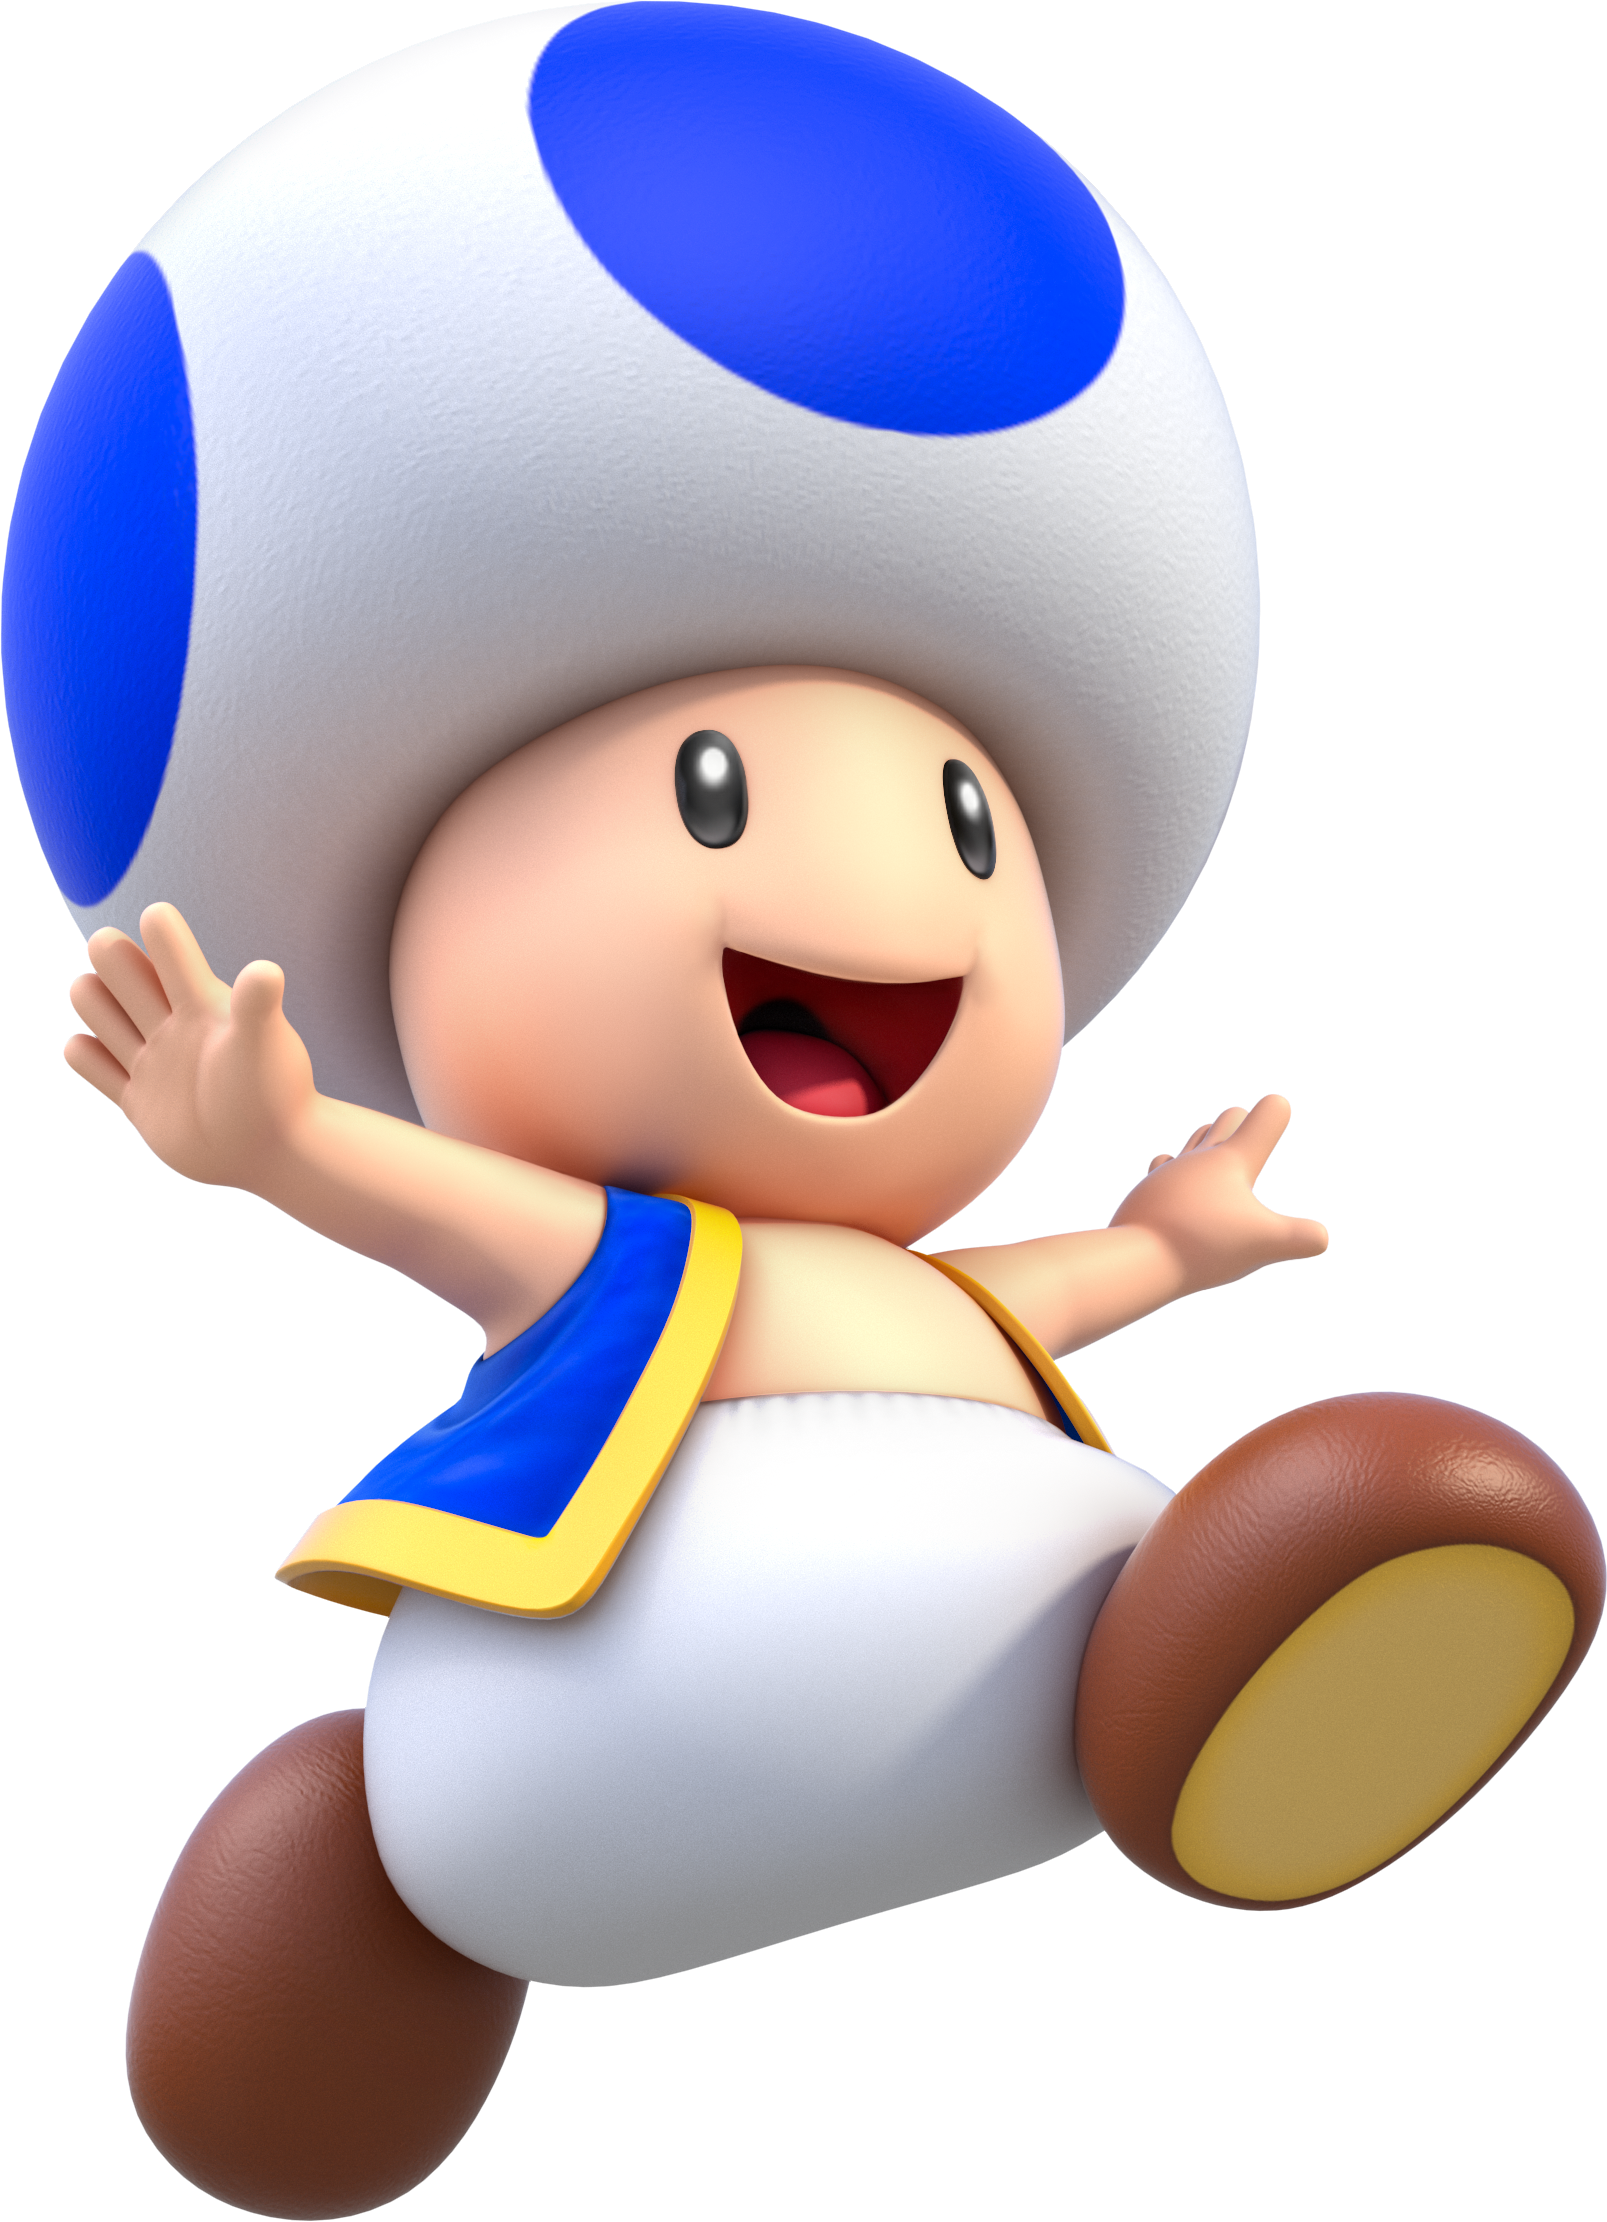 Blue Toad Super Mario 3d World Wiki Fandom Powered By Wikia